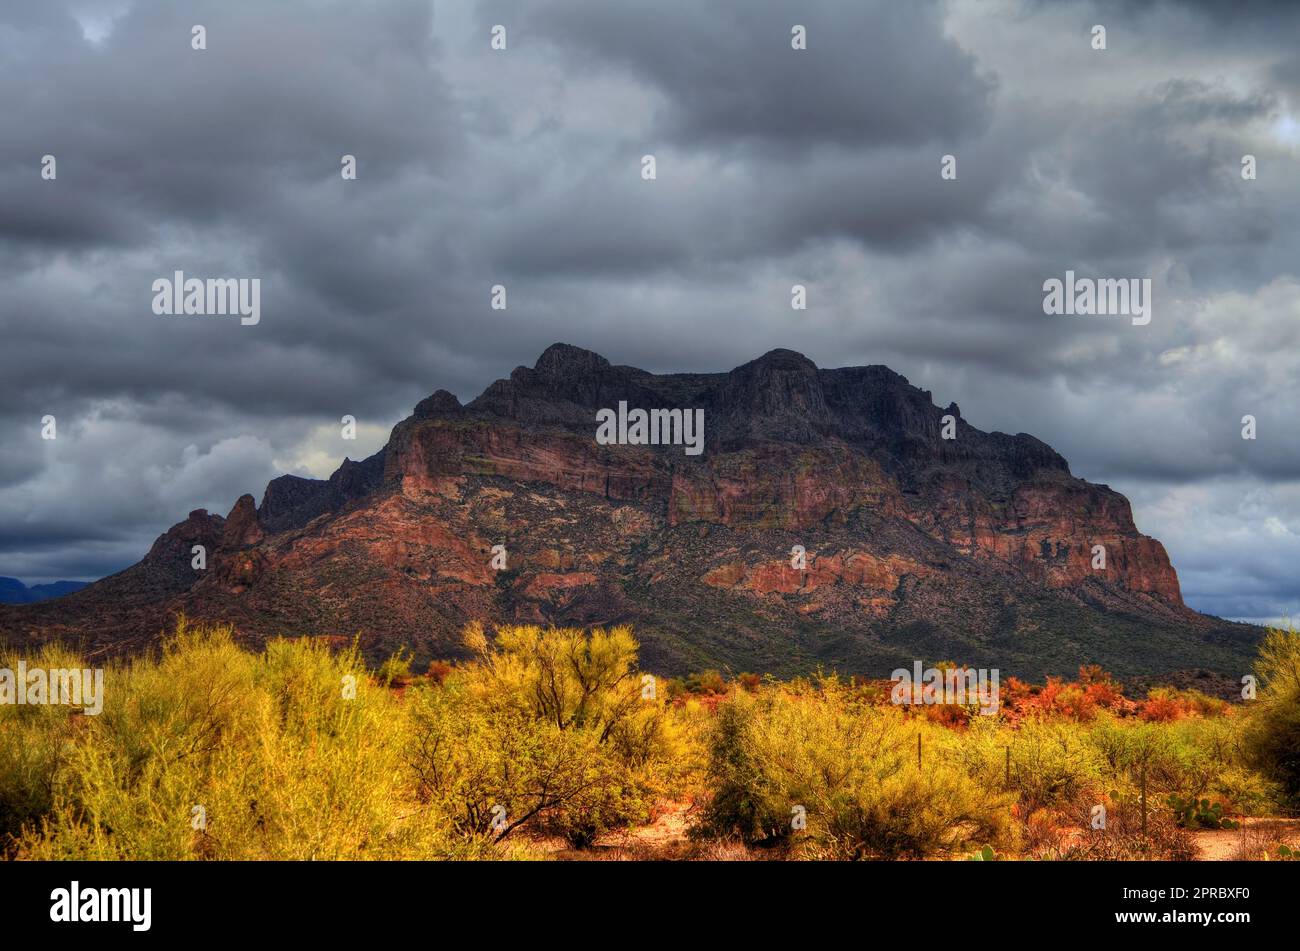 Storm forming over a rugged desert mountain Stock Photo